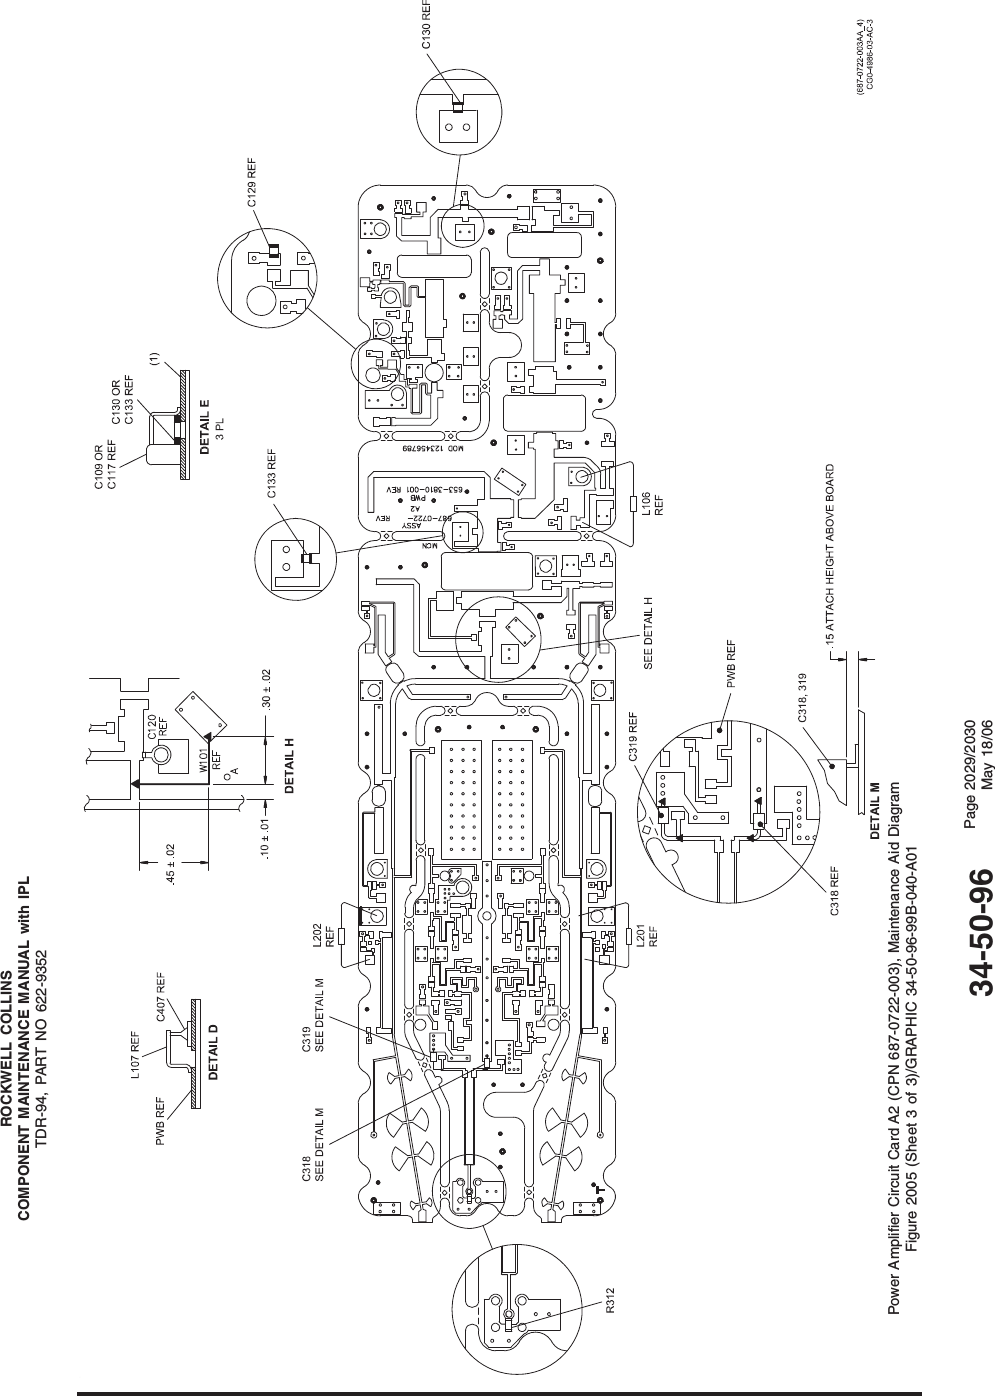 ROCKWELL COLLINSCOMPONENT MAINTENANCE MANUAL with IPLTDR-94, PART NO 622-9352Power Amplifier Circuit Card A2 (CPN 687-0722-003), Maintenance Aid DiagramFigure 2005 (Sheet 3 of 3)/GRAPHIC 34-50-96-99B-040-A0134-50-96 Page 2029/2030May 18/06